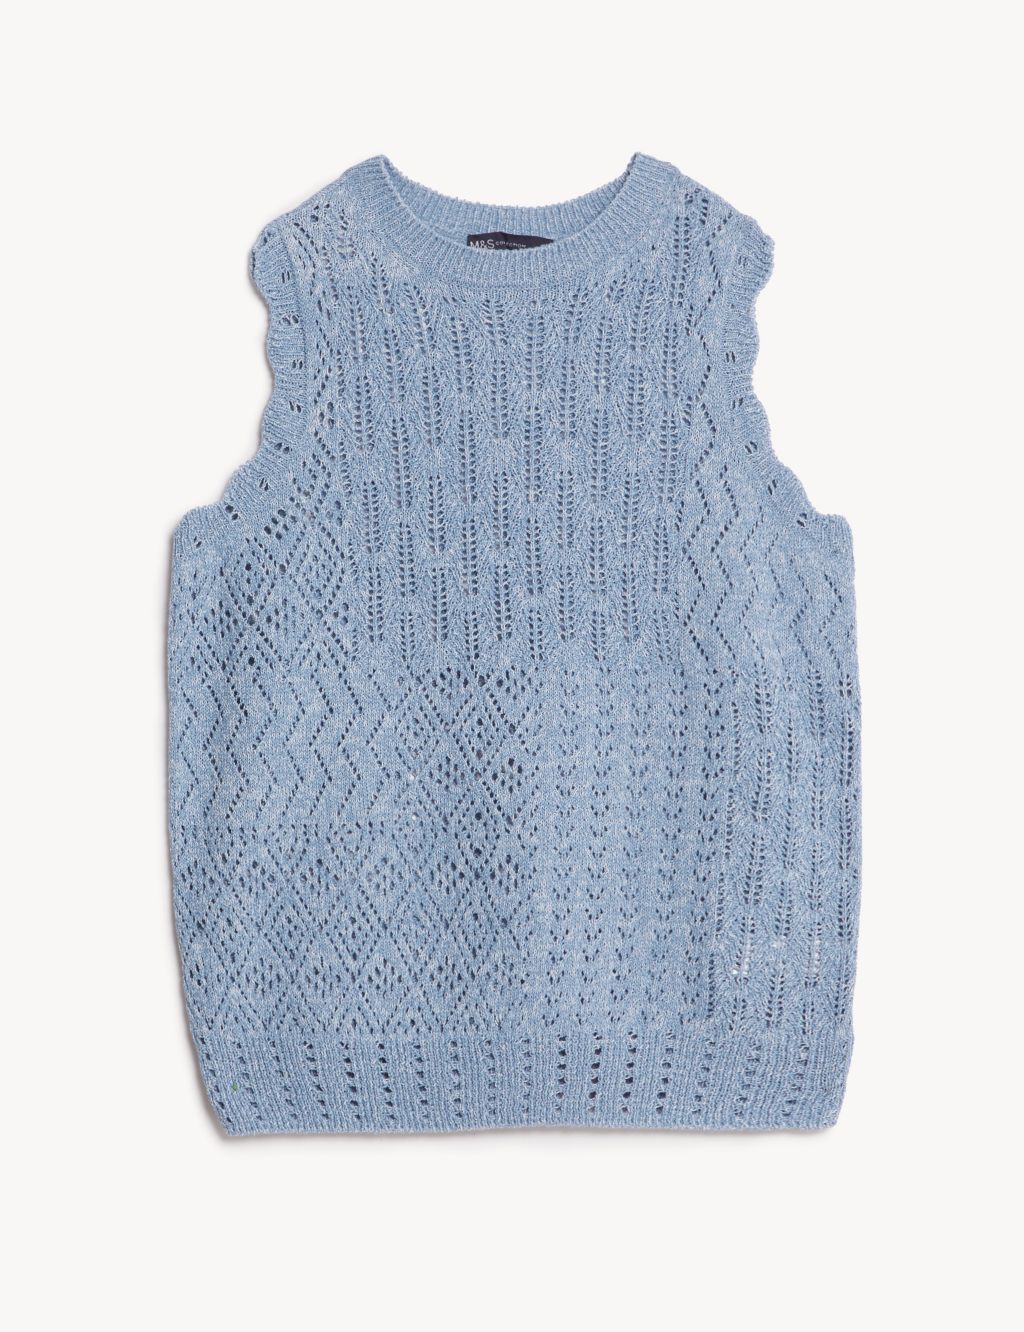 Cotton Rich Textured Knitted Vest image 2